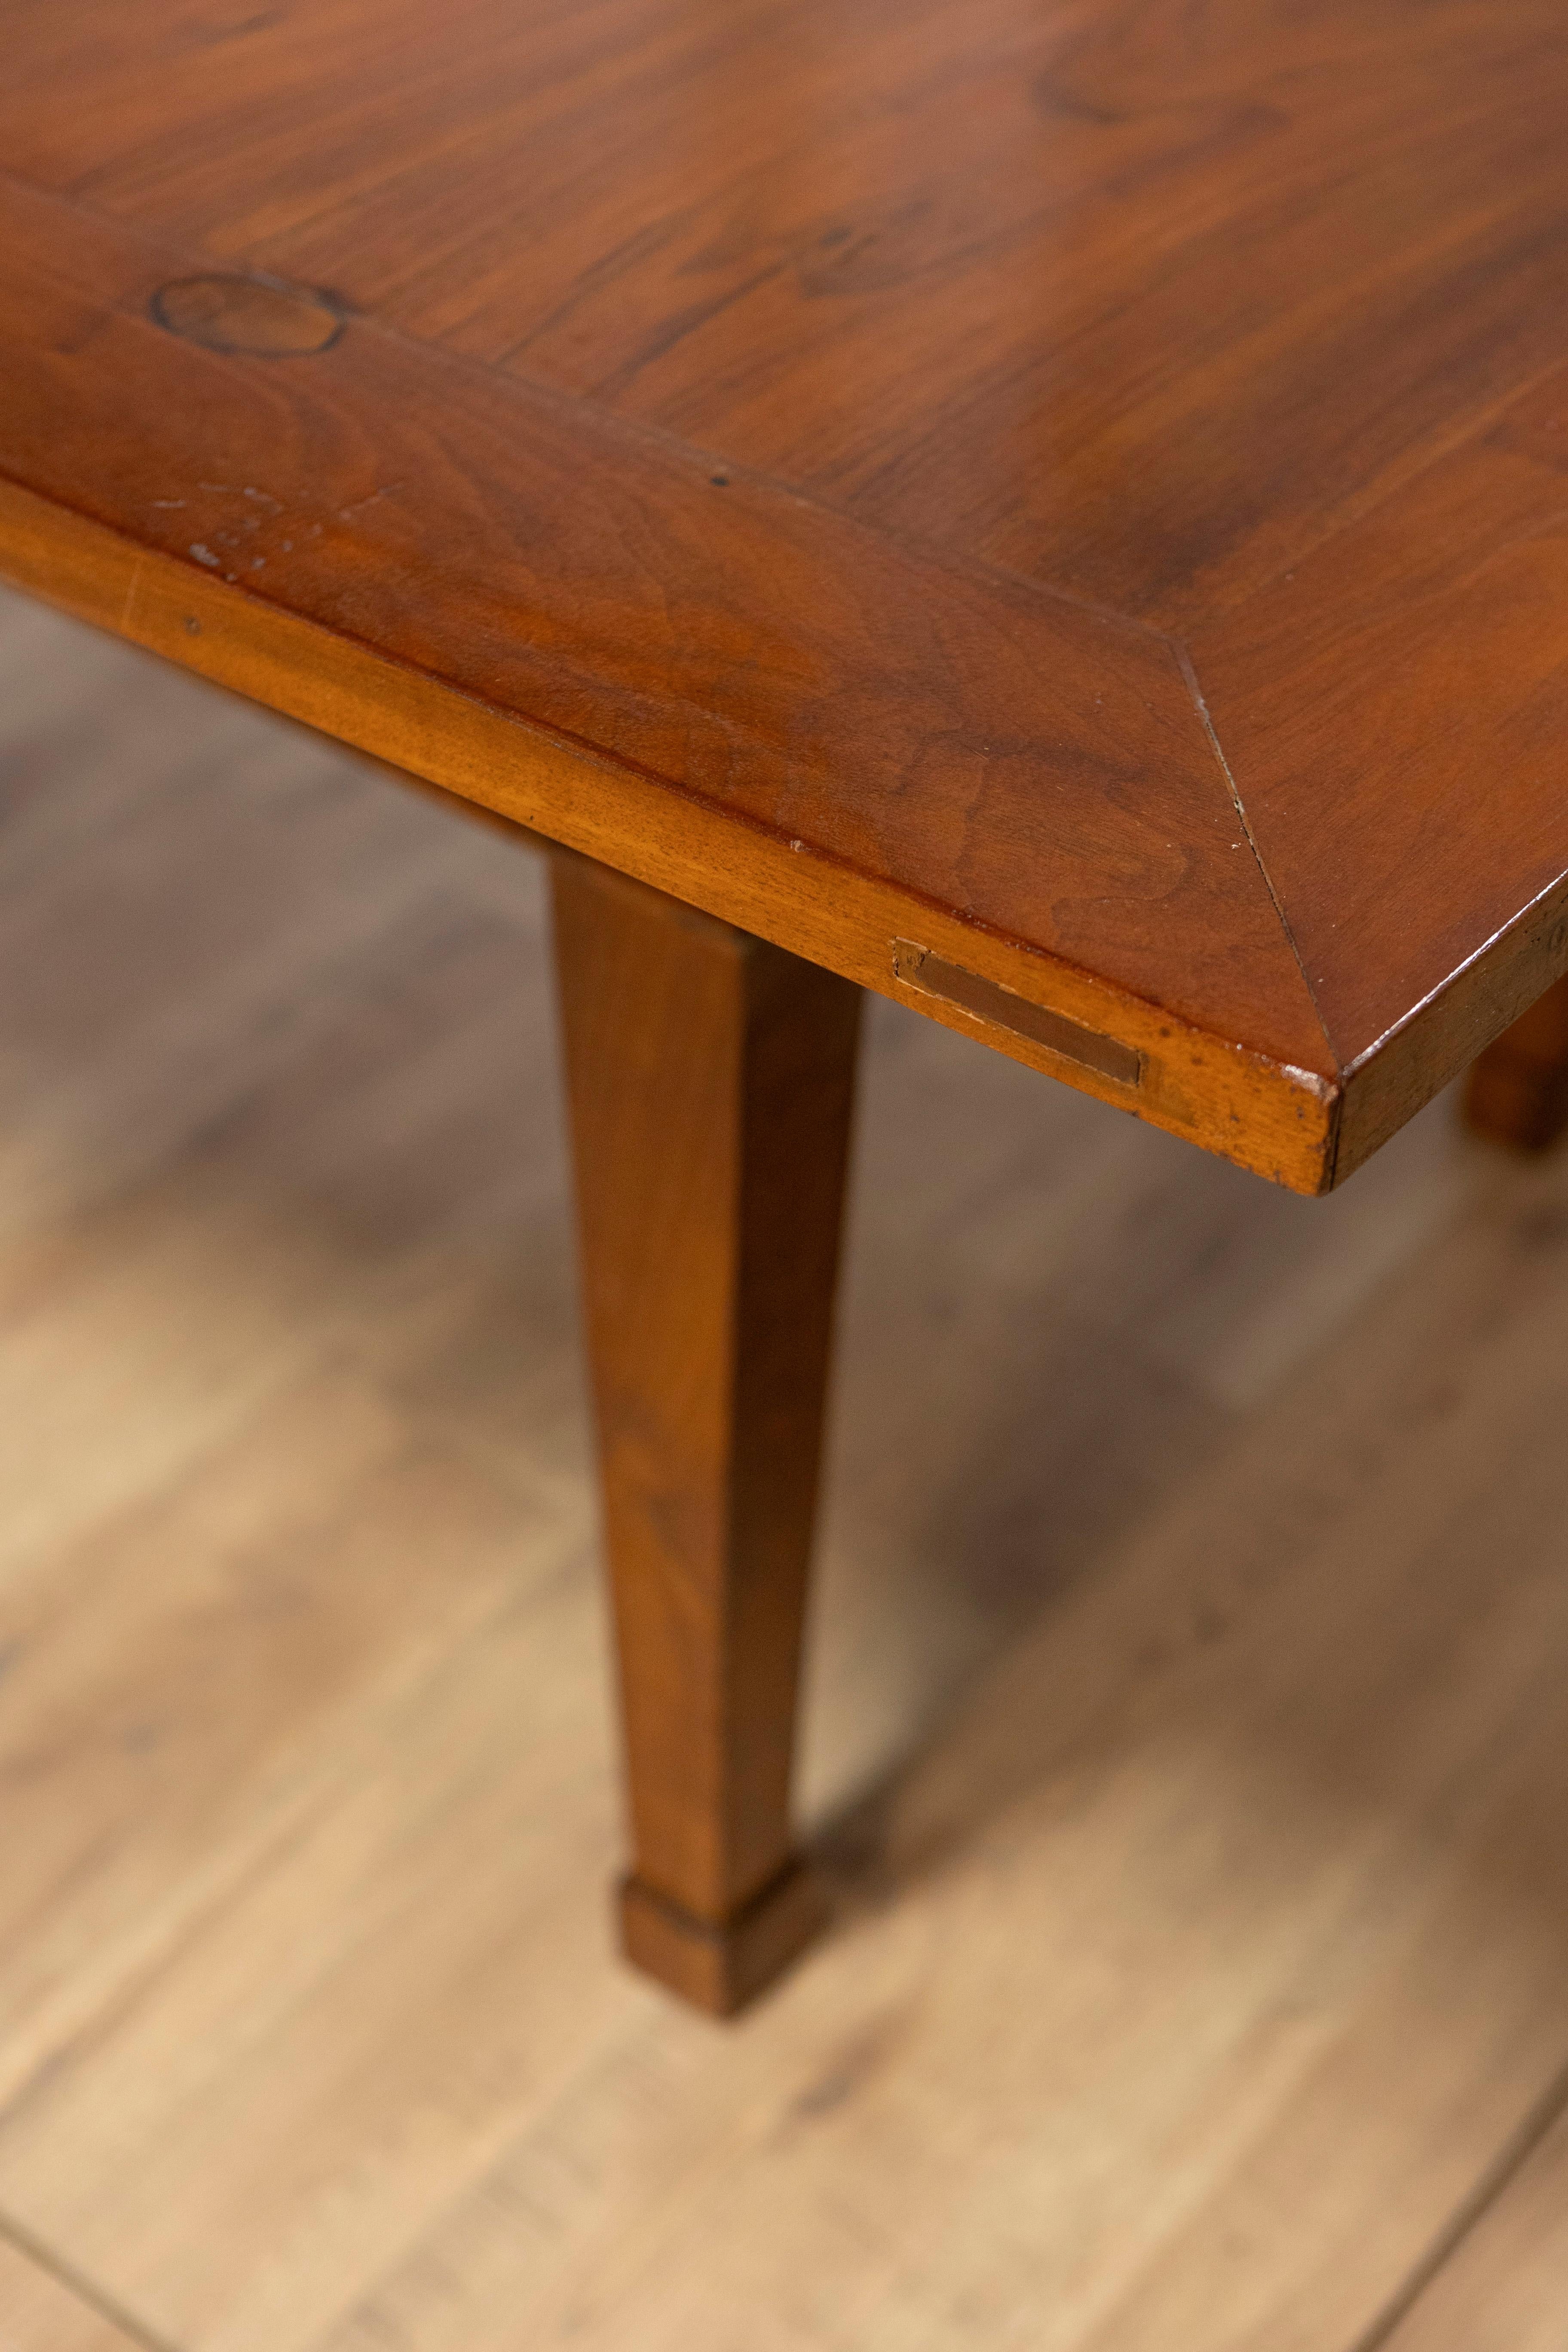 Italian Early 19th Century Walnut Folding Table with Tapered Legs For Sale 6